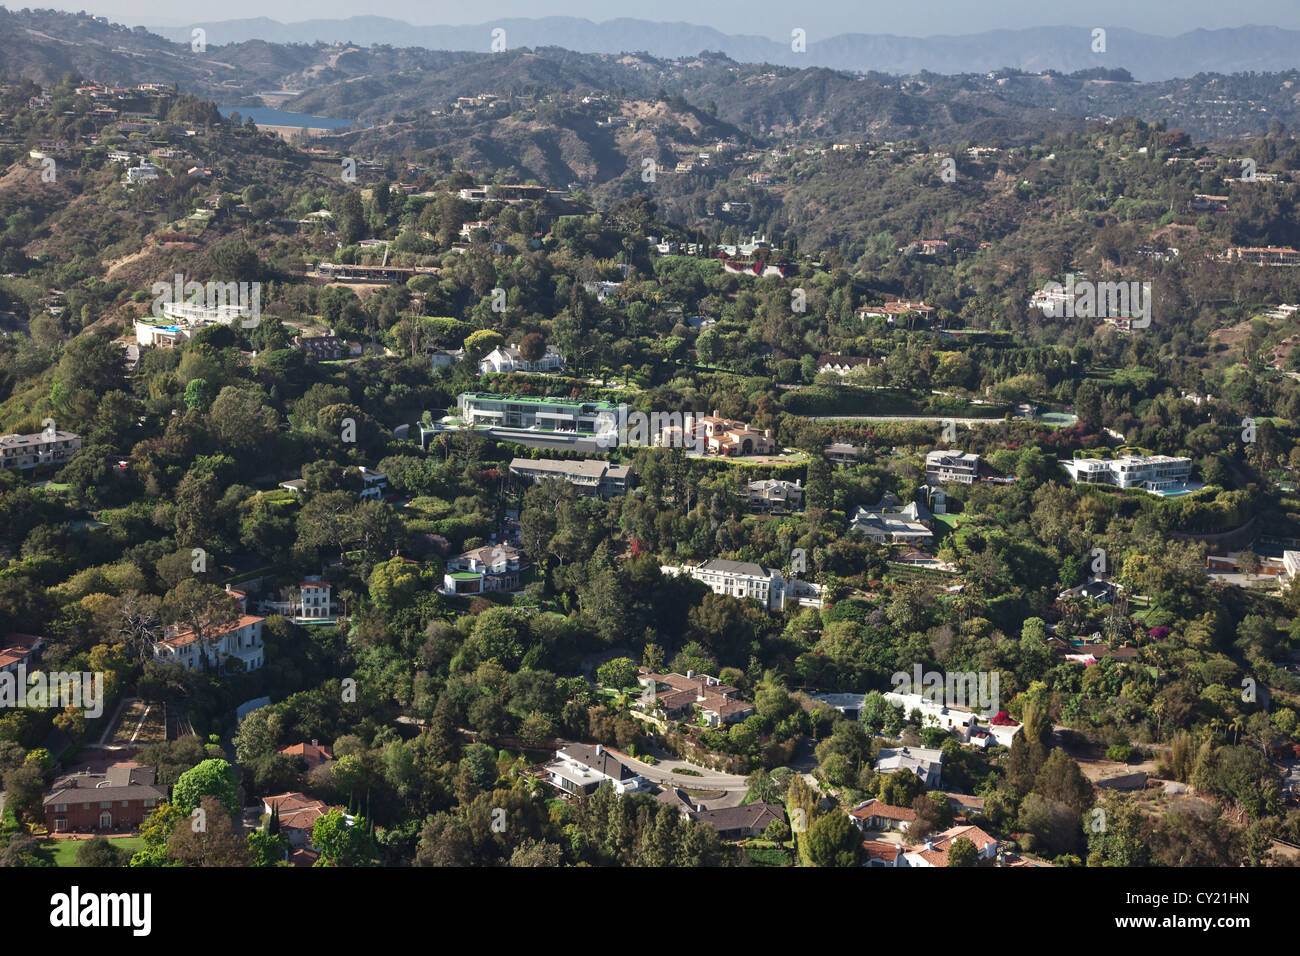 Luxurious homes in the Holmy HIlls district of Los Angeles, California. Stock Photo